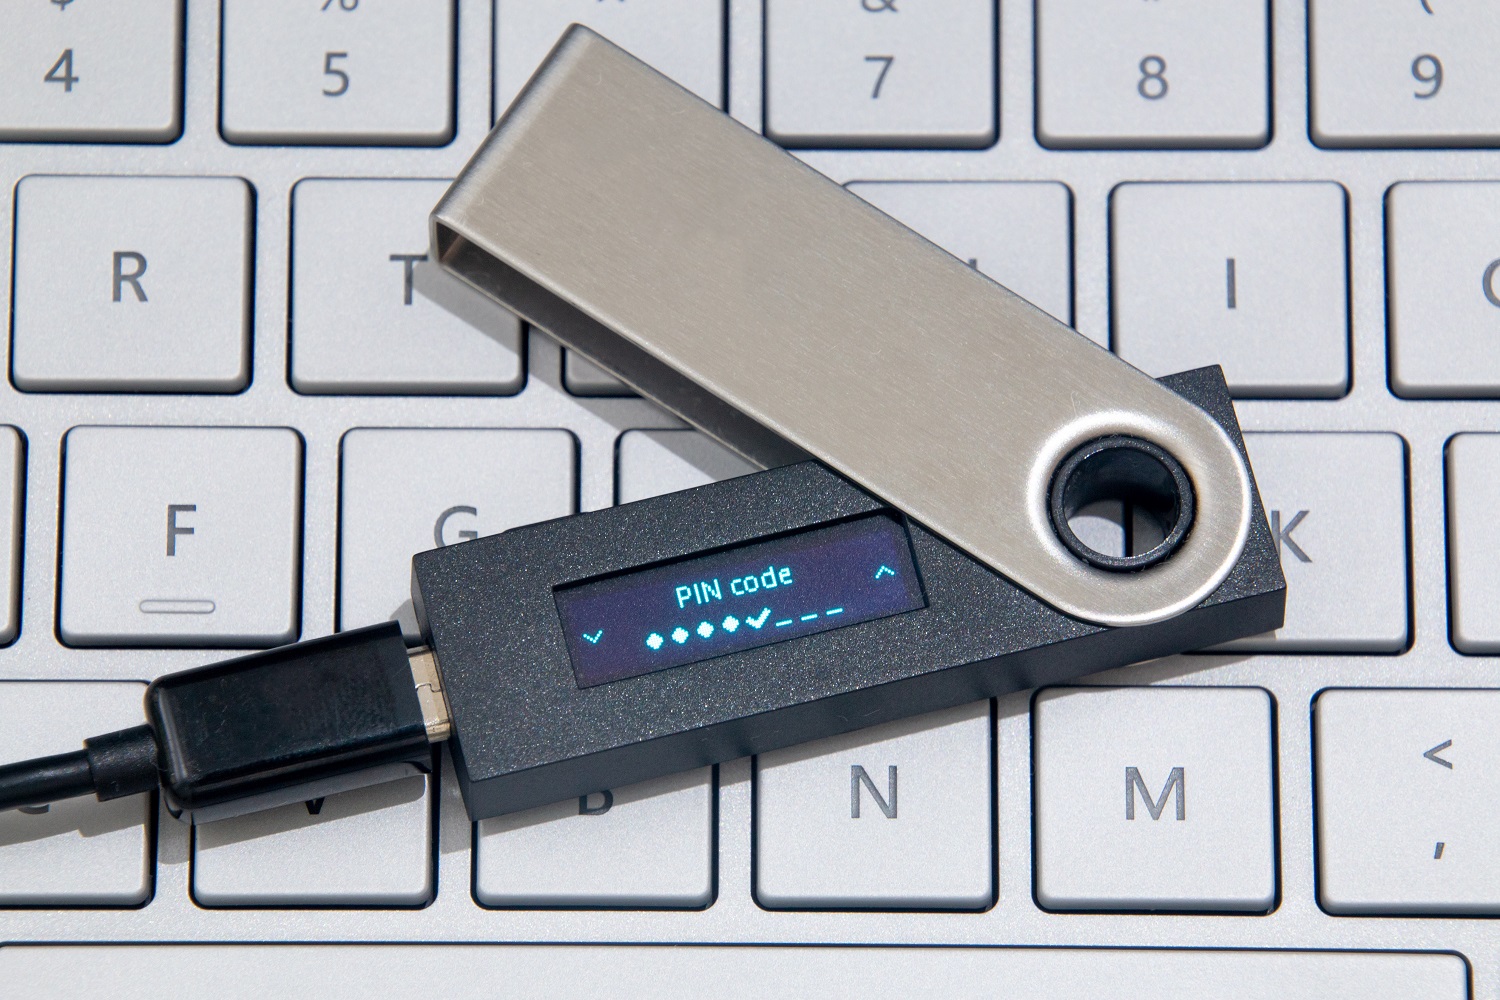 A crypto hardware wallet, connected to a cable via a USB socket, rests on a laptop keyboard.